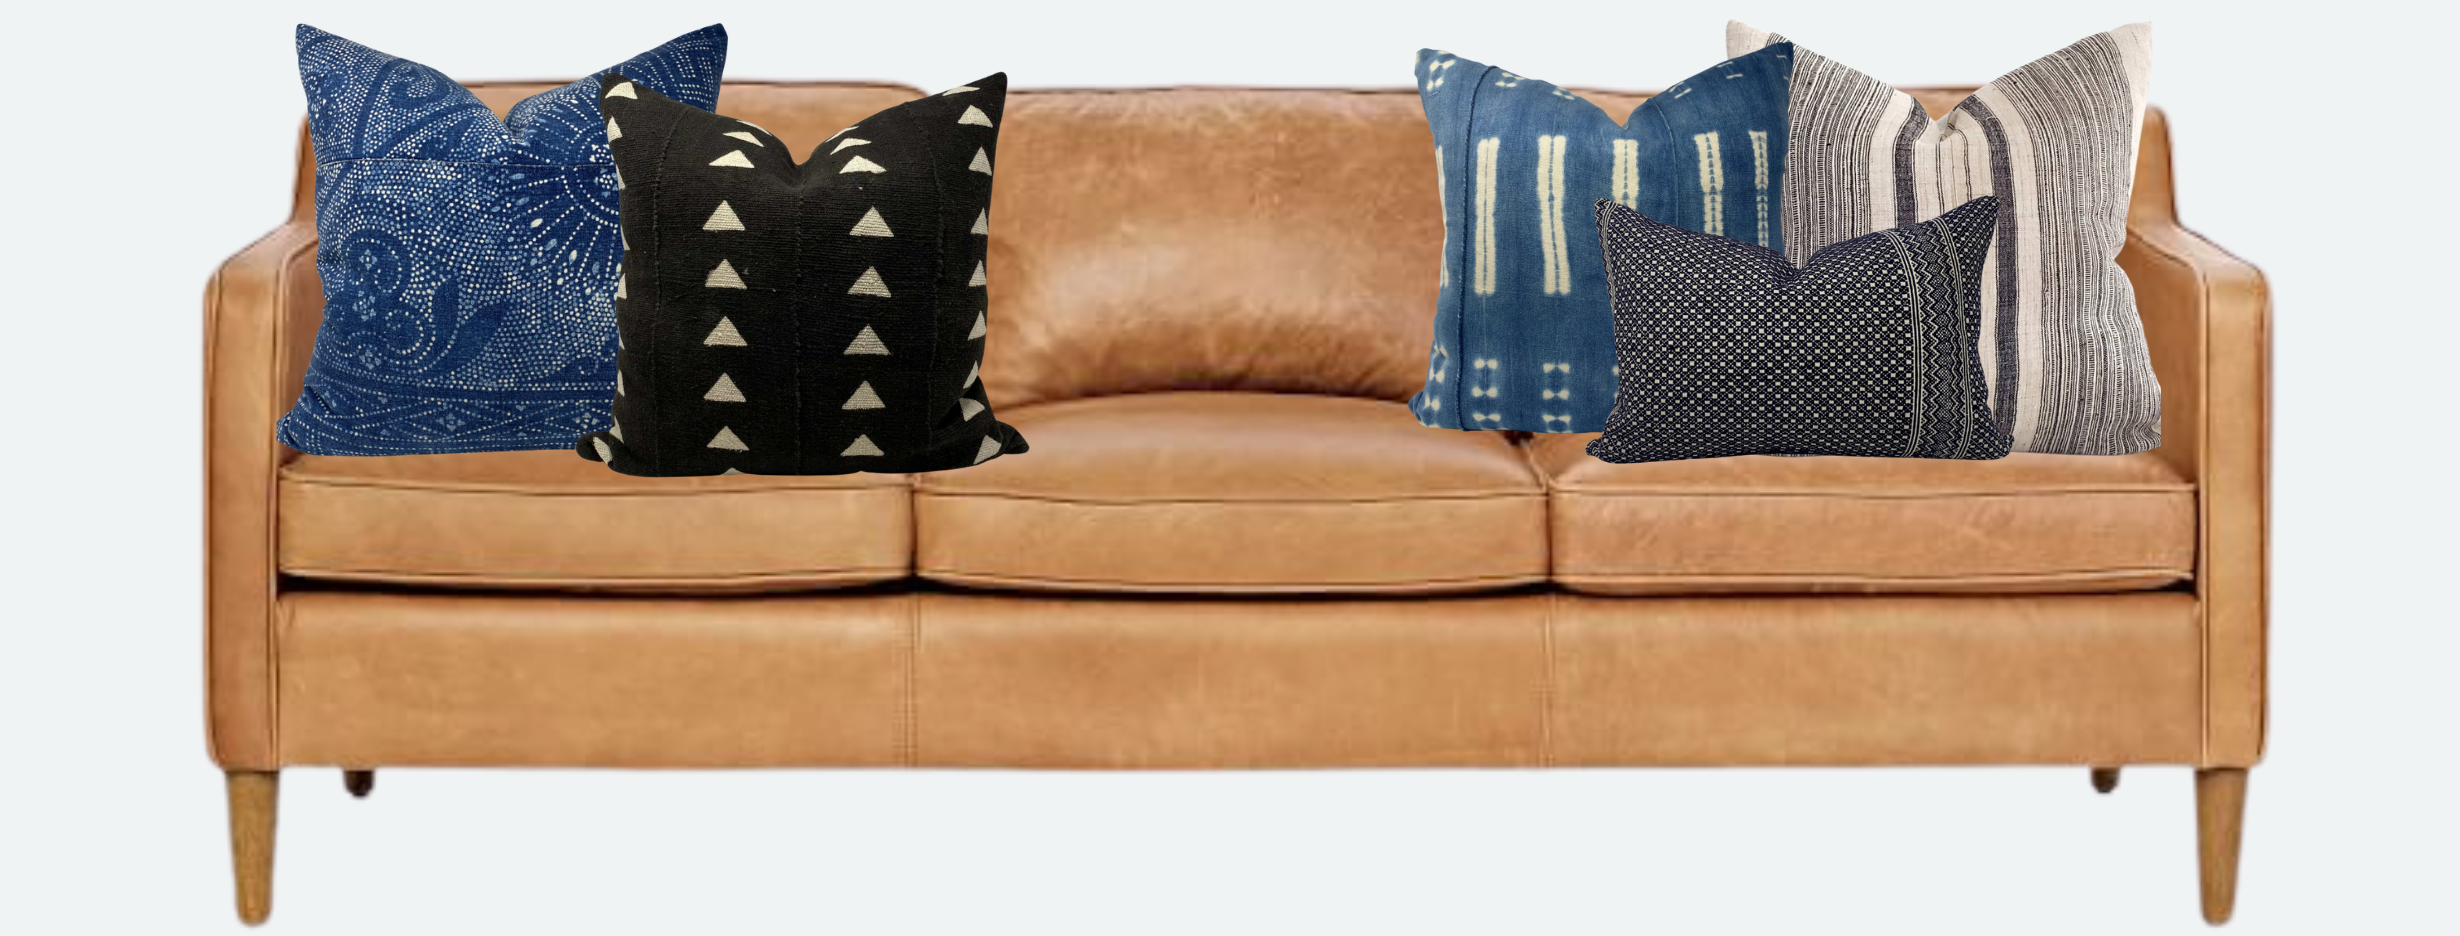 5 Pillow Combinations for a Dark Grey Couch – EVERAND